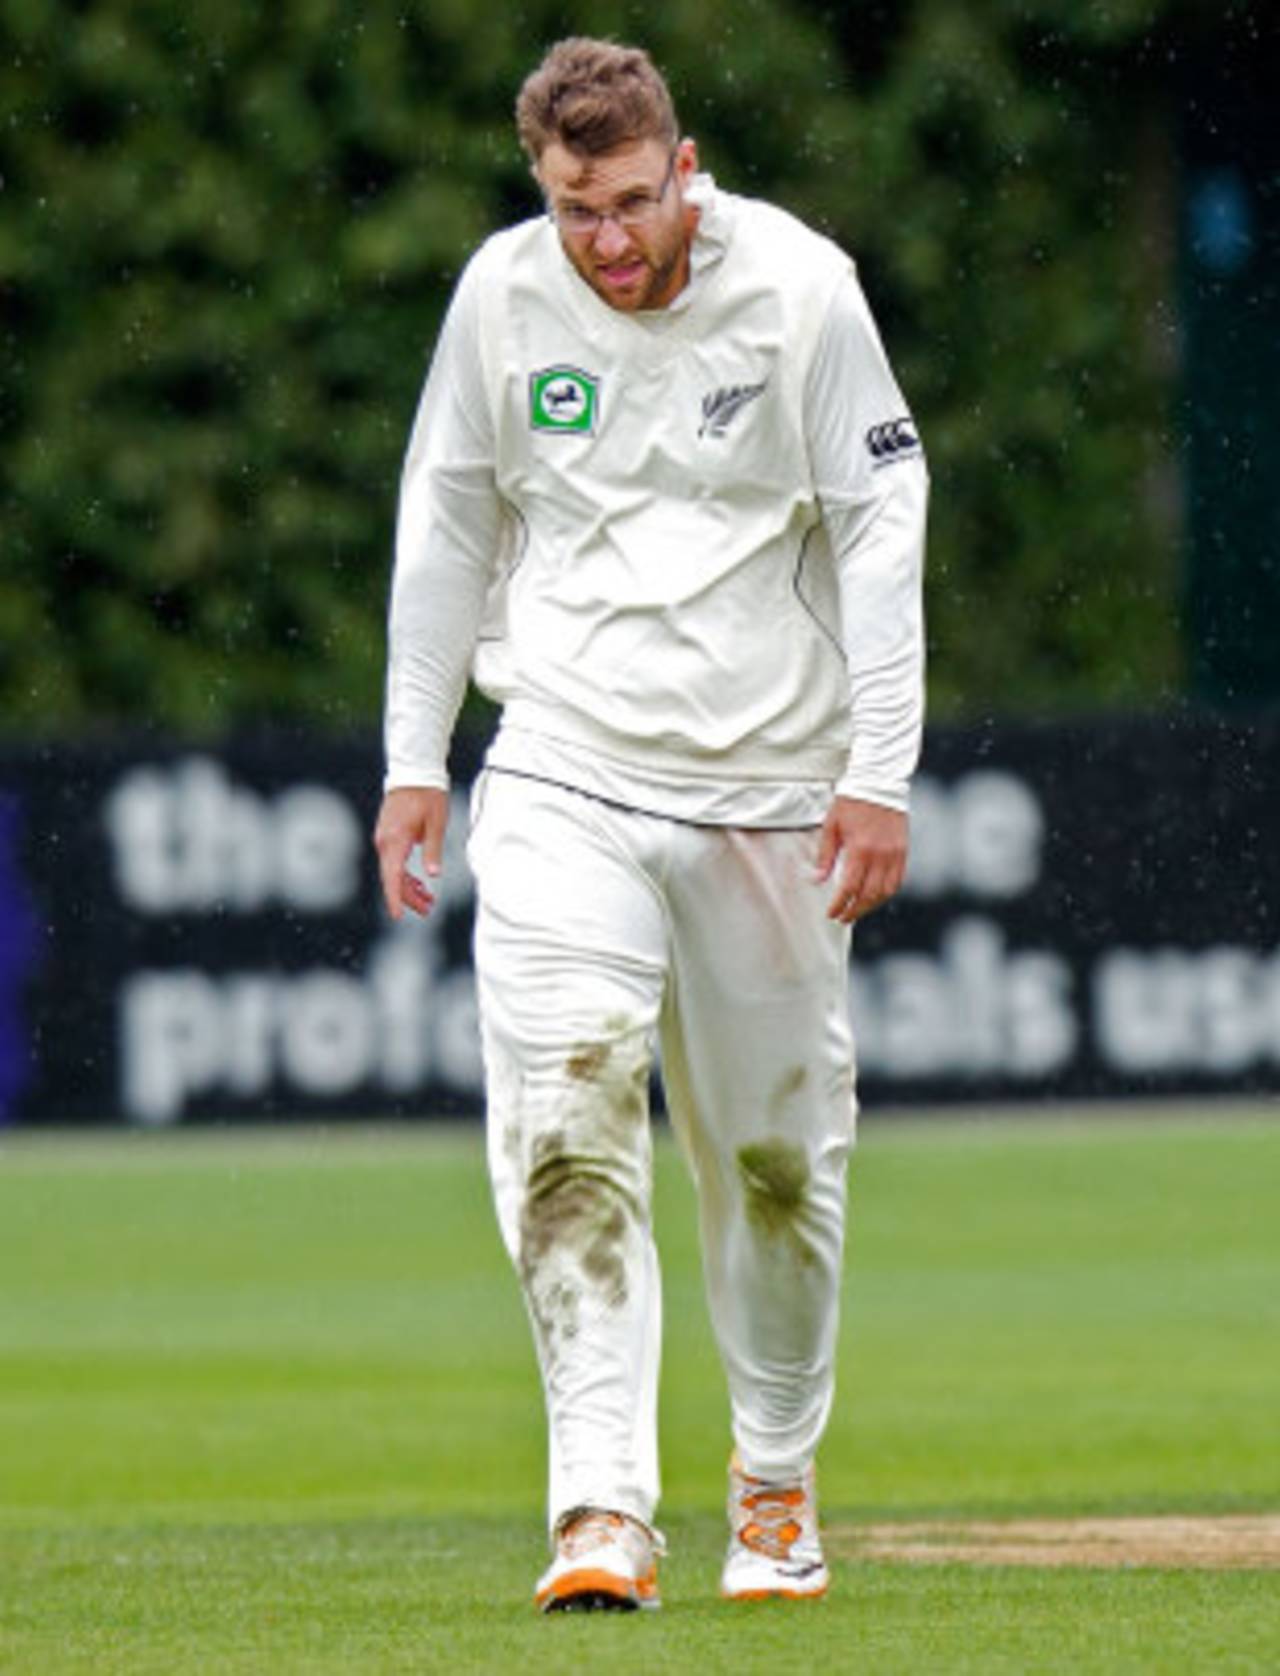 Daniel Vettori walks through the wind and rain, New Zealand v South Africa, 3rd Test, Wellington, 2nd day, March 24, 2012